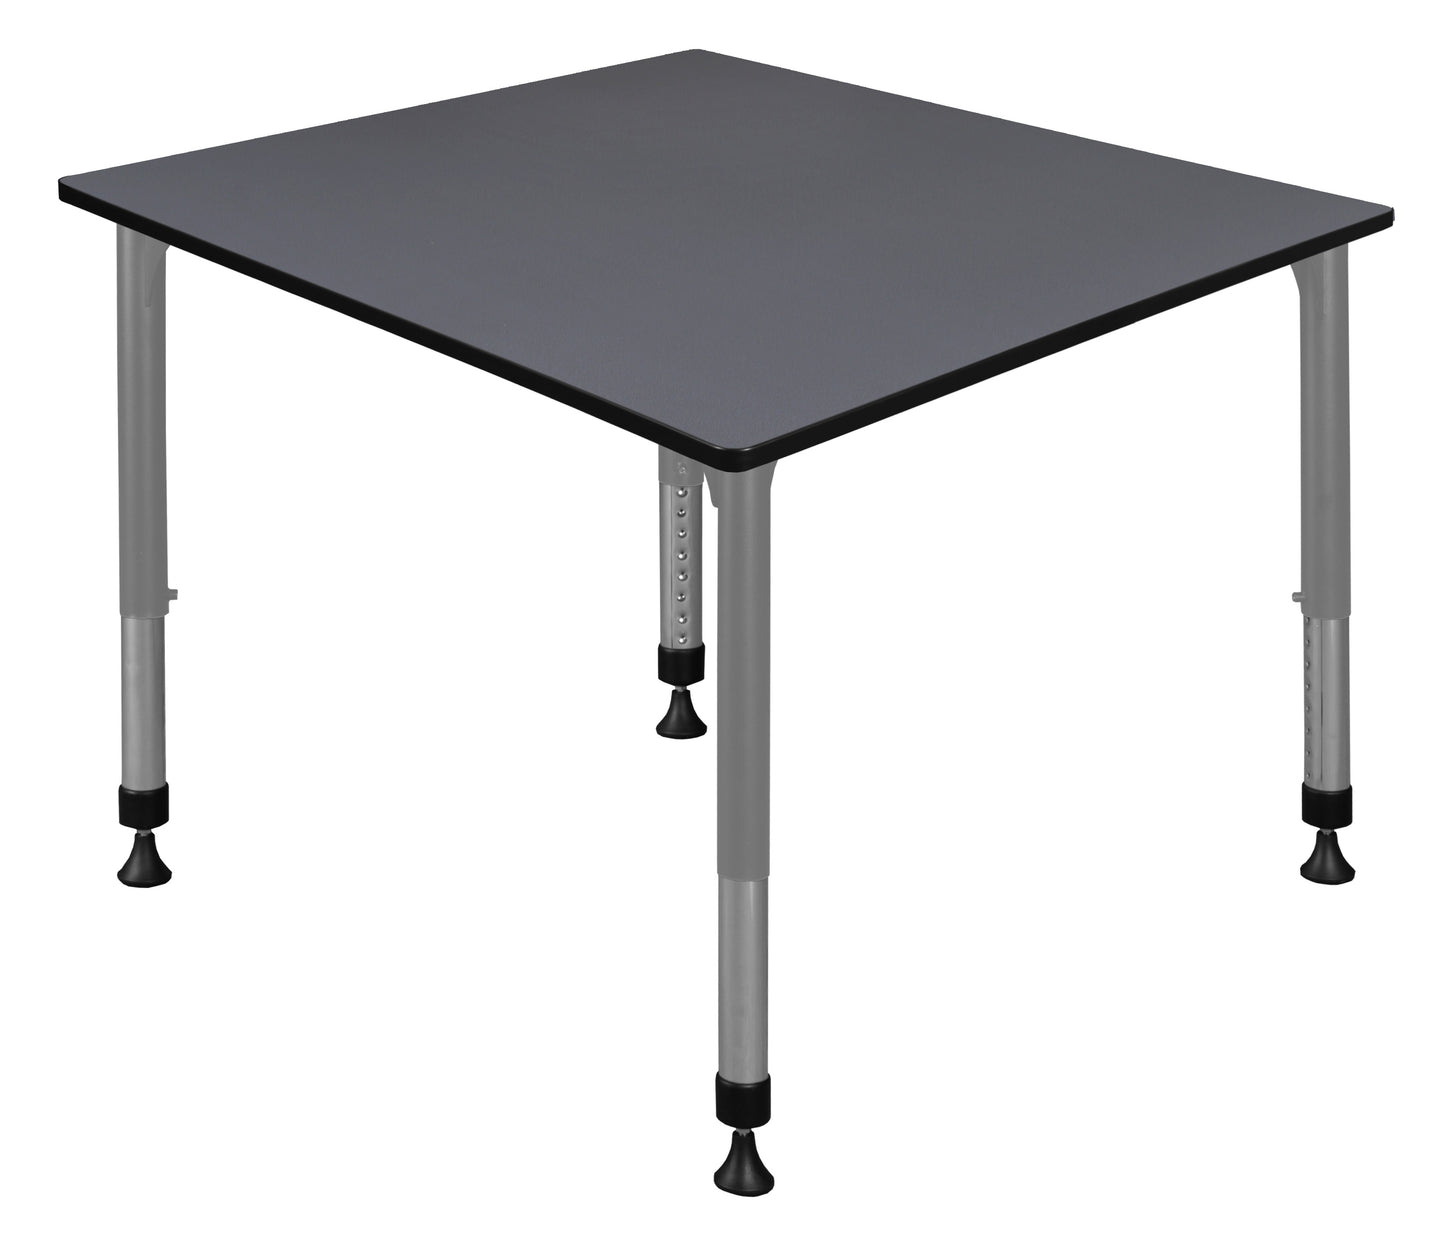 Regency Kee 48 in. Square Height Adjustable Mobile Classroom Activity Table